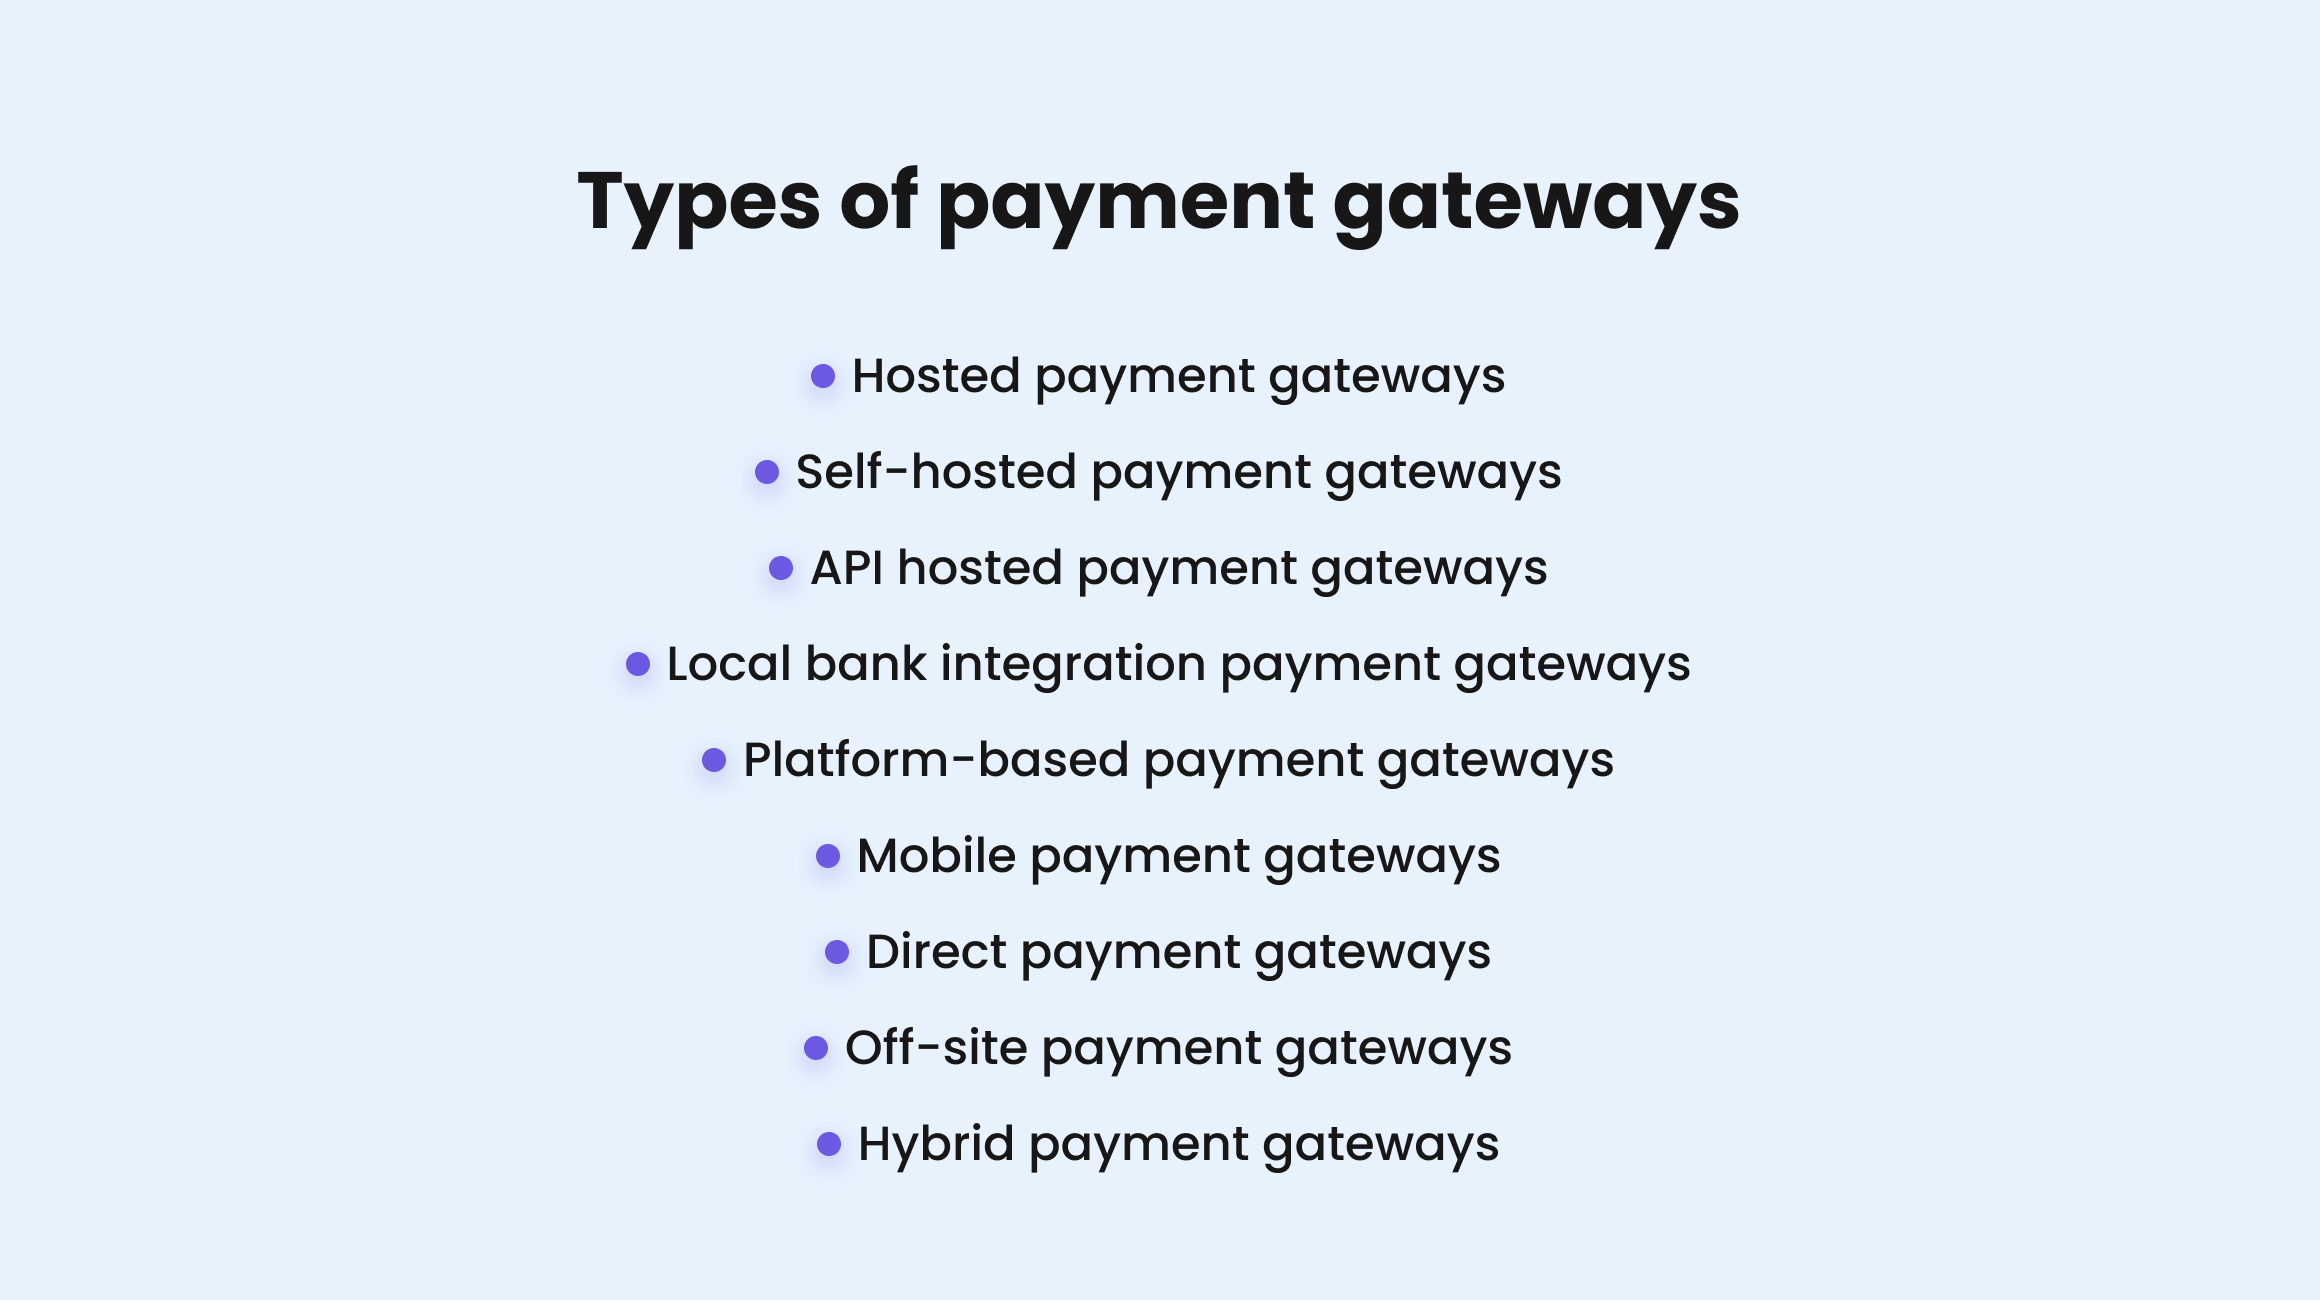 Types of payment gateways